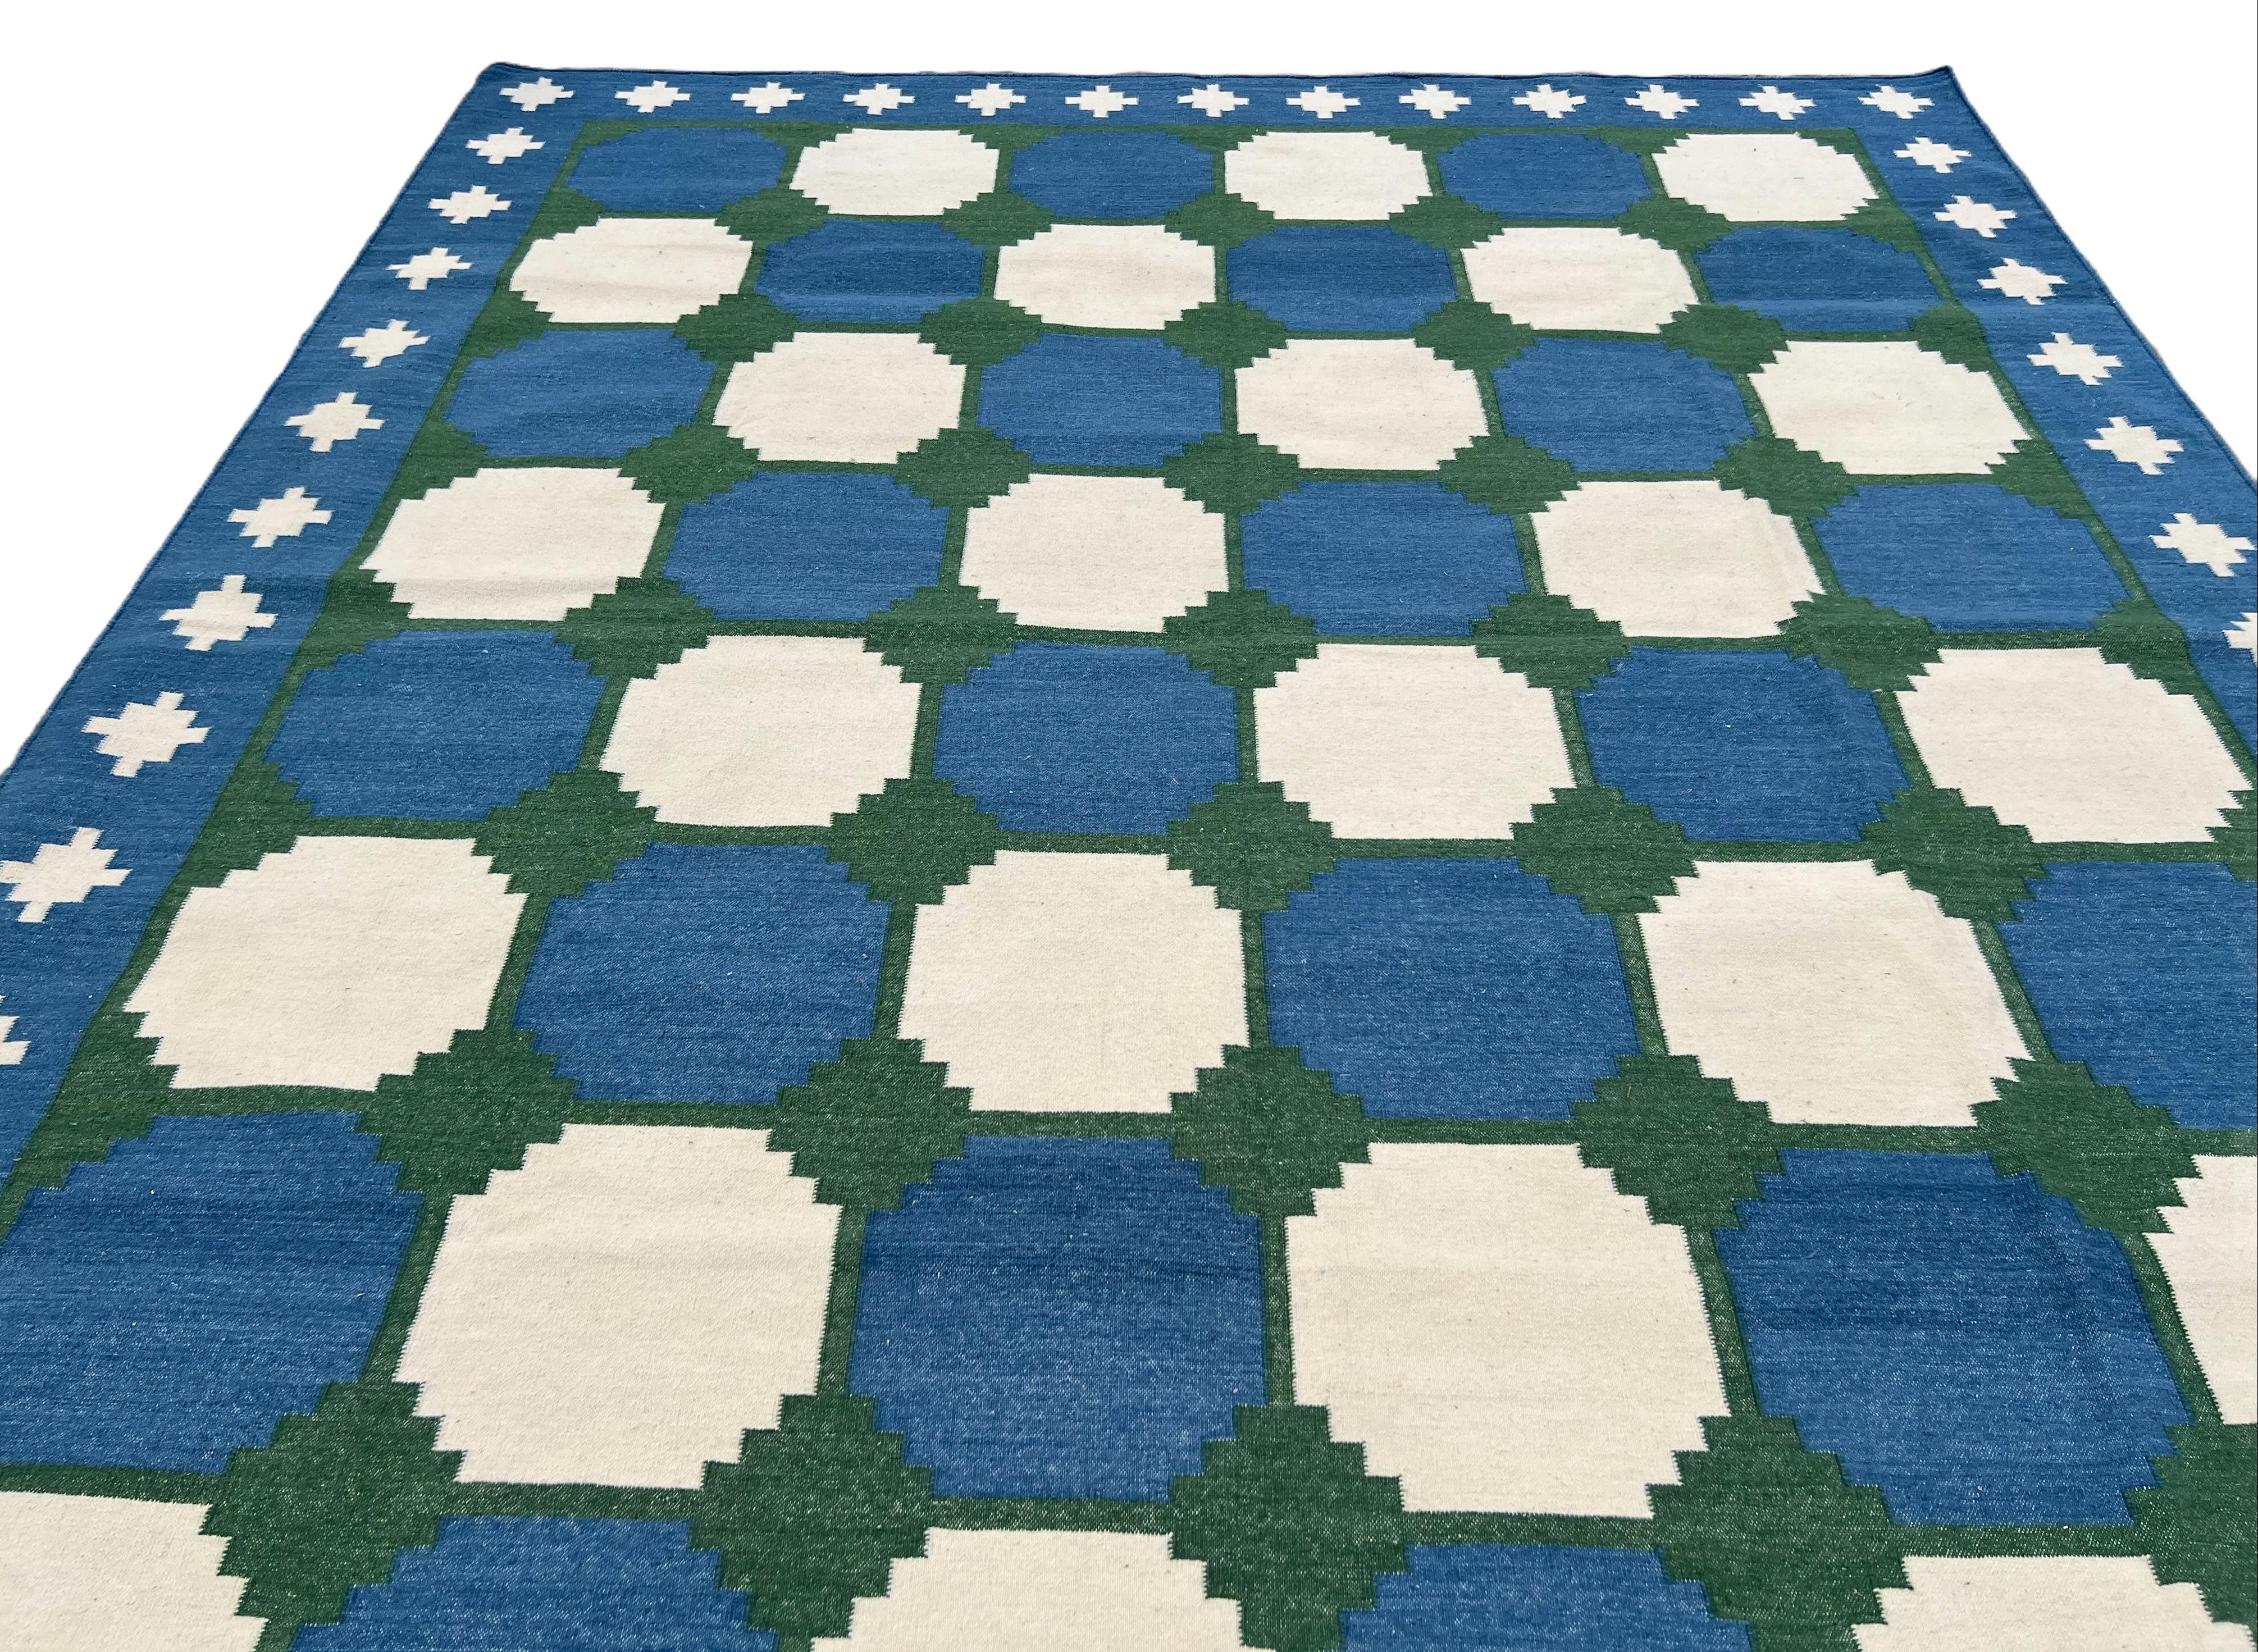 Handmade Woolen Area Flat Weave Rug, 8x10 Blue And Green Tile Patterned Dhurrie In New Condition For Sale In Jaipur, IN